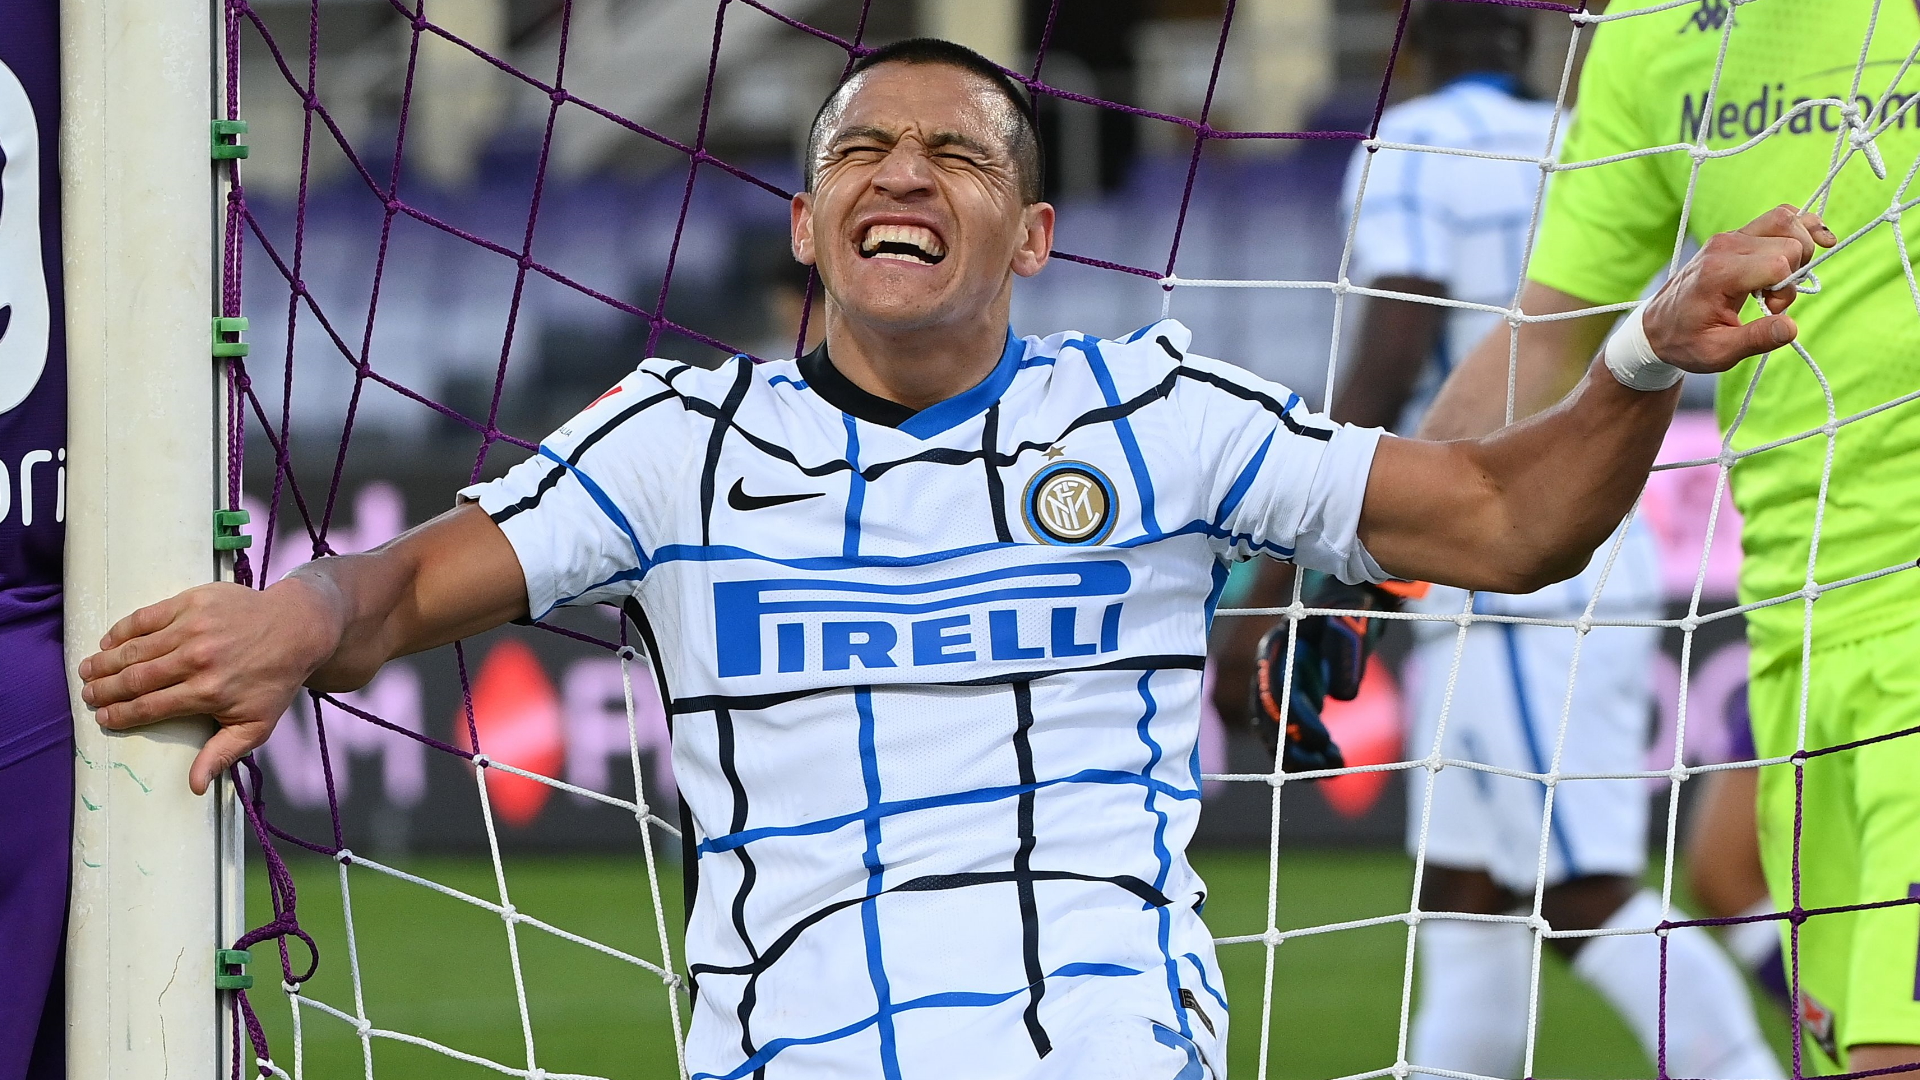 'His numbers must be better' - Conte says goal-shy Inter forward Alexis Sanchez is prey to 'merciless' stats